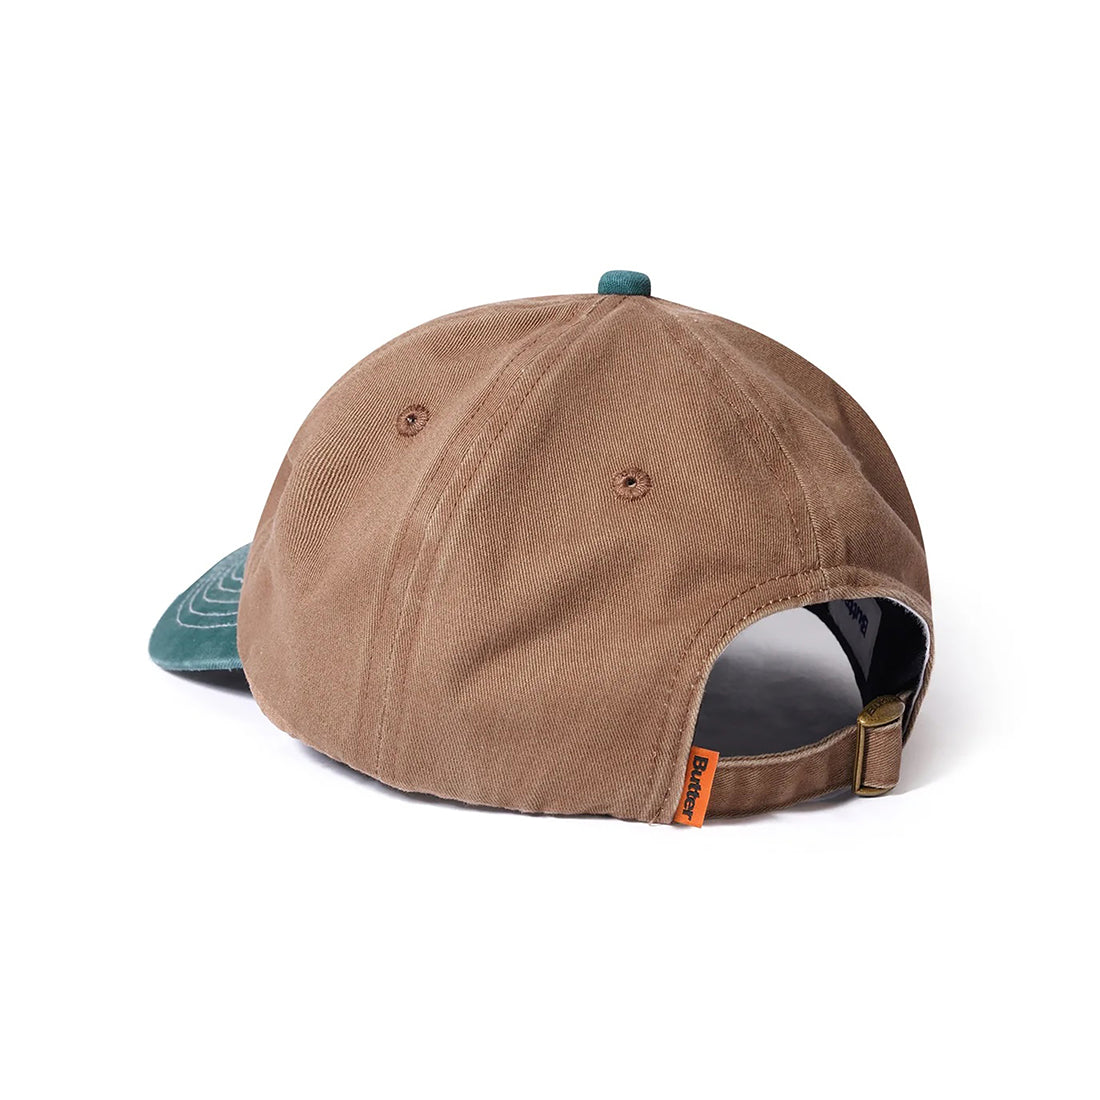 Lonnie 6 Panel Cap Brown Forest